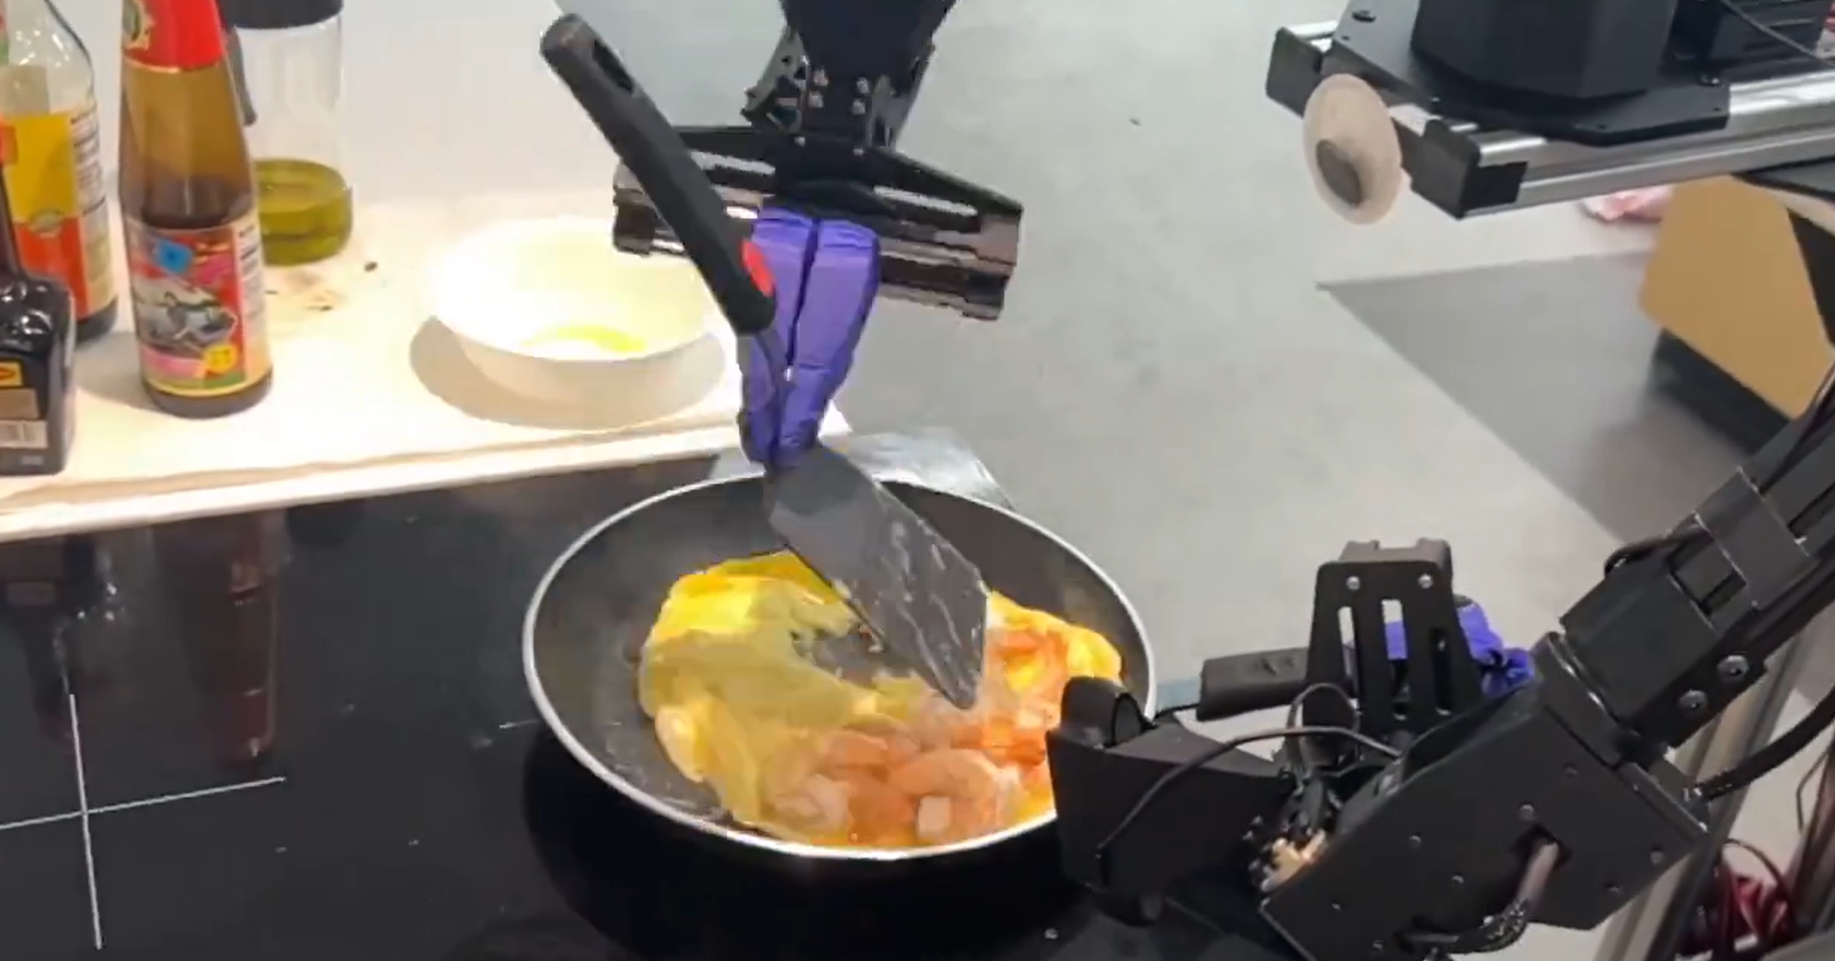 New Robot Kitchen Can Cook and Clean